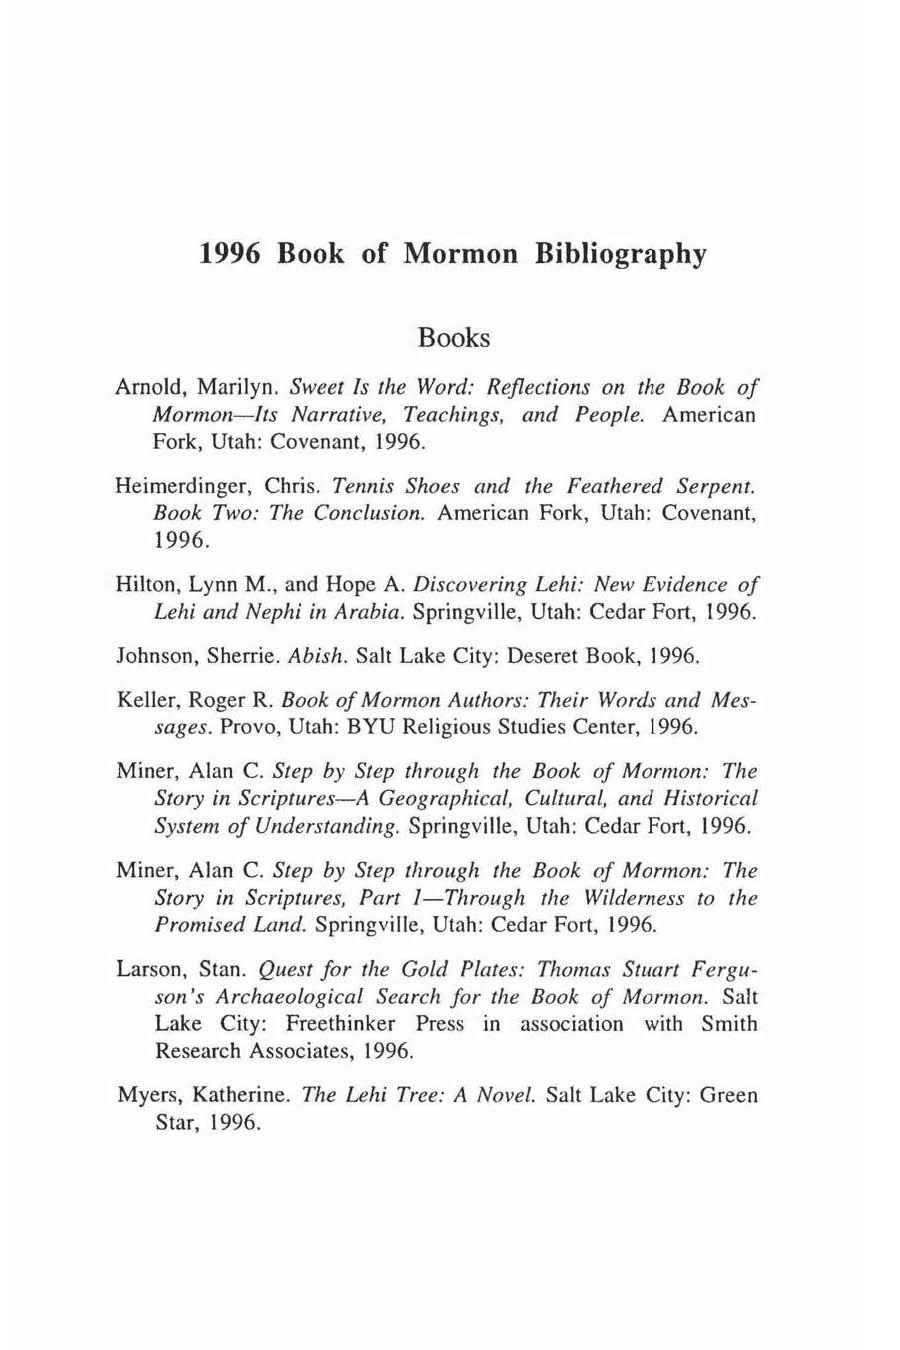 1996 Book of Mormon Bibliography Books Arnold, Marilyn. Sweet Is the Word: Reflections on the Book of Mormoll- Its Narrative, Teachings, and People. American Fork, Utah: Covenant, 1996.